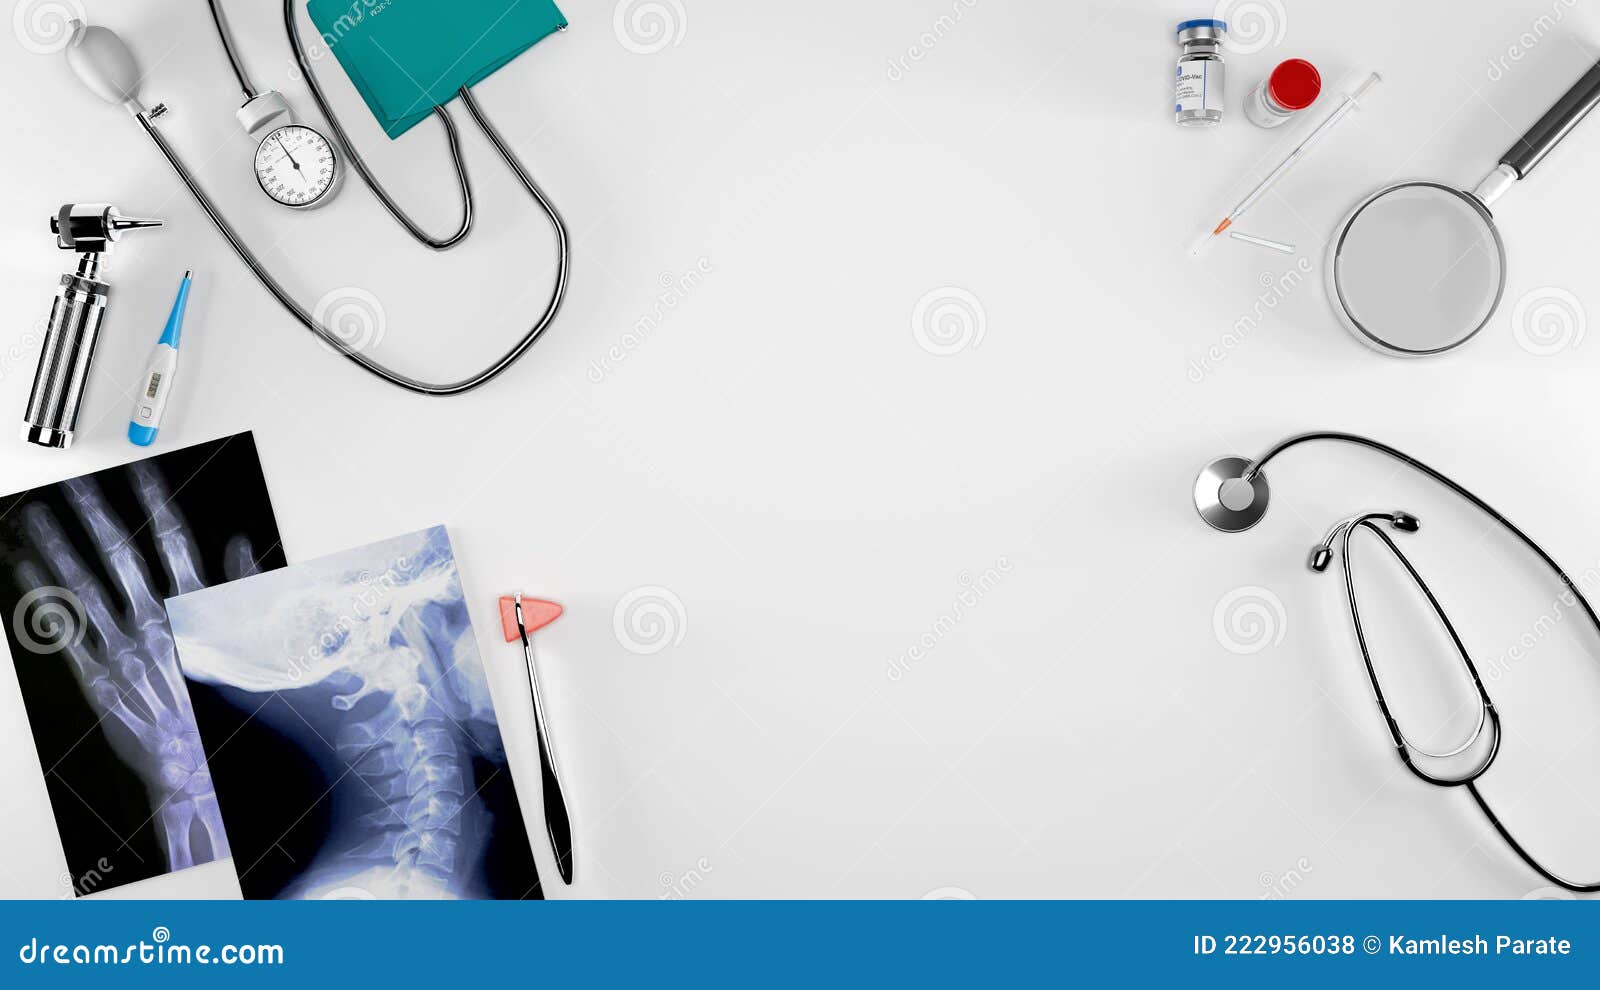 Medical Equipment 3d Model Rendering . Stock Photo - Image of care, cure:  222956038